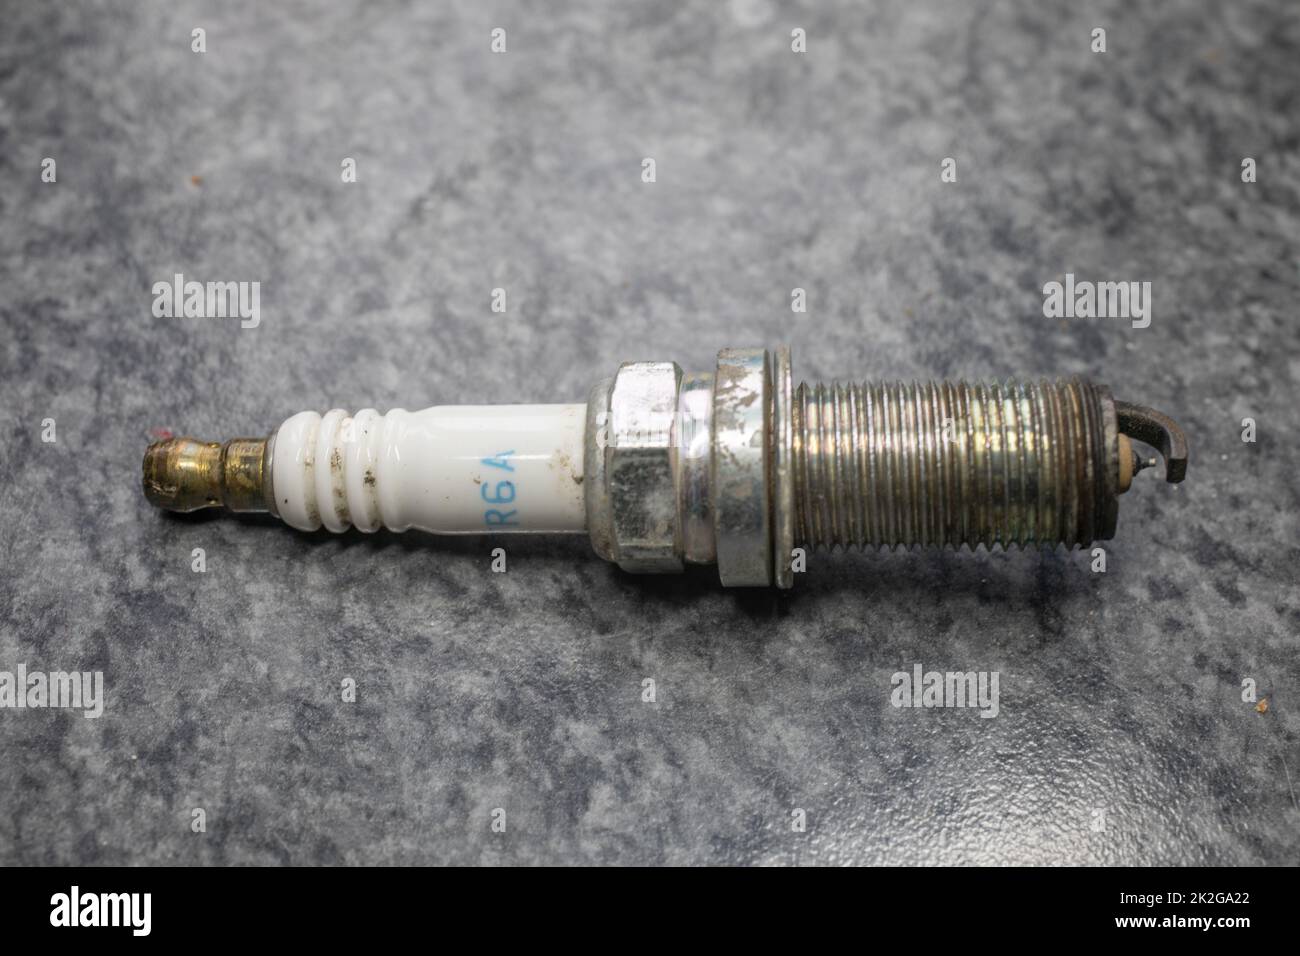 Spark plug for engines Stock Photo